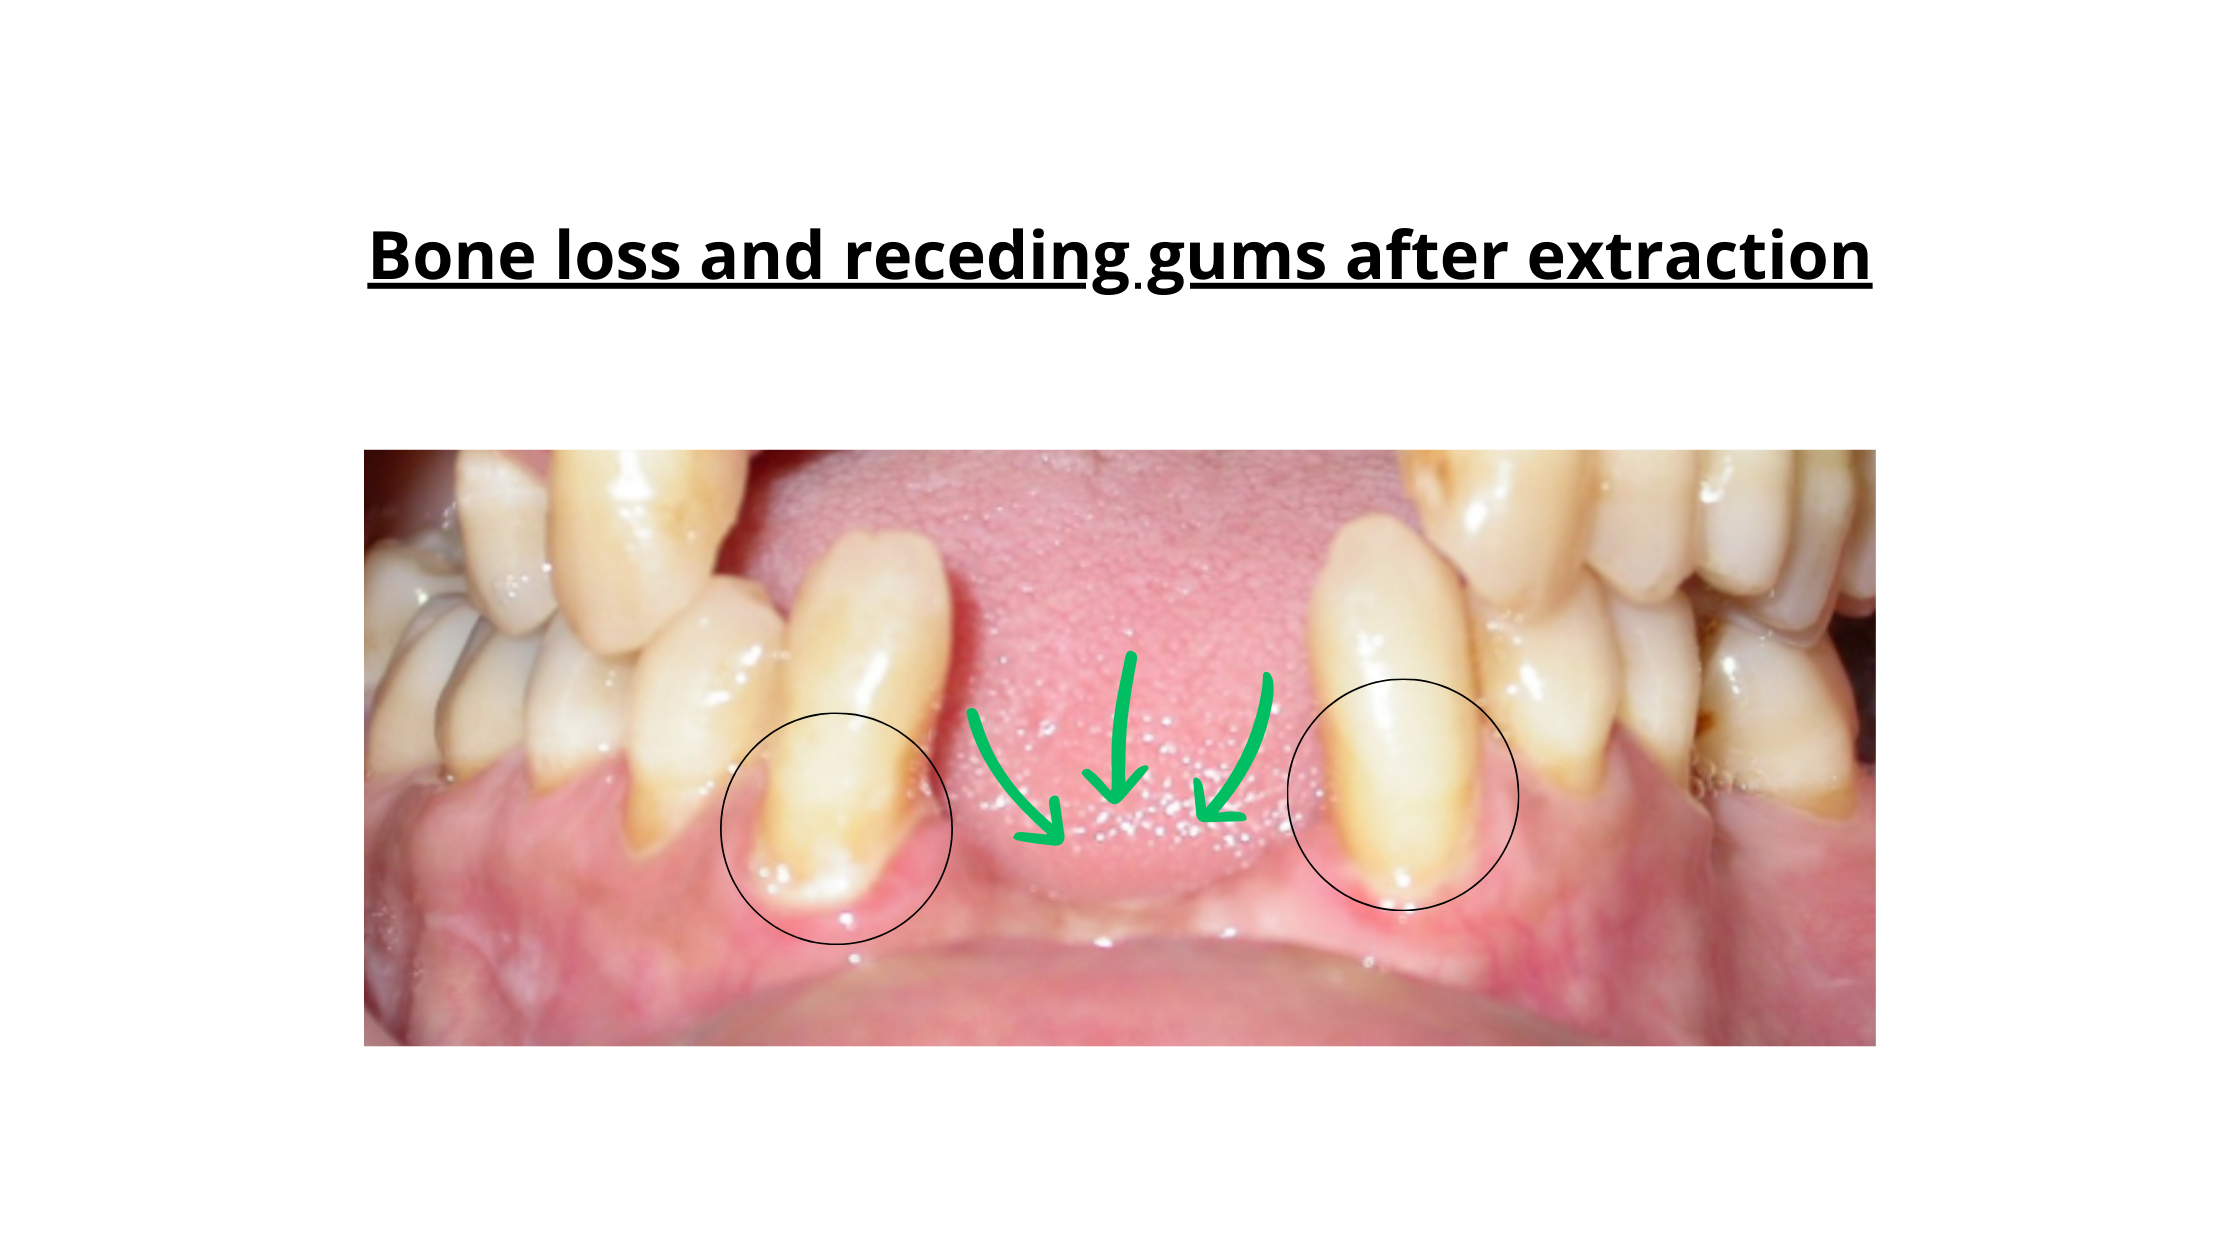 Receding gums due to bone loss following tooth extraction